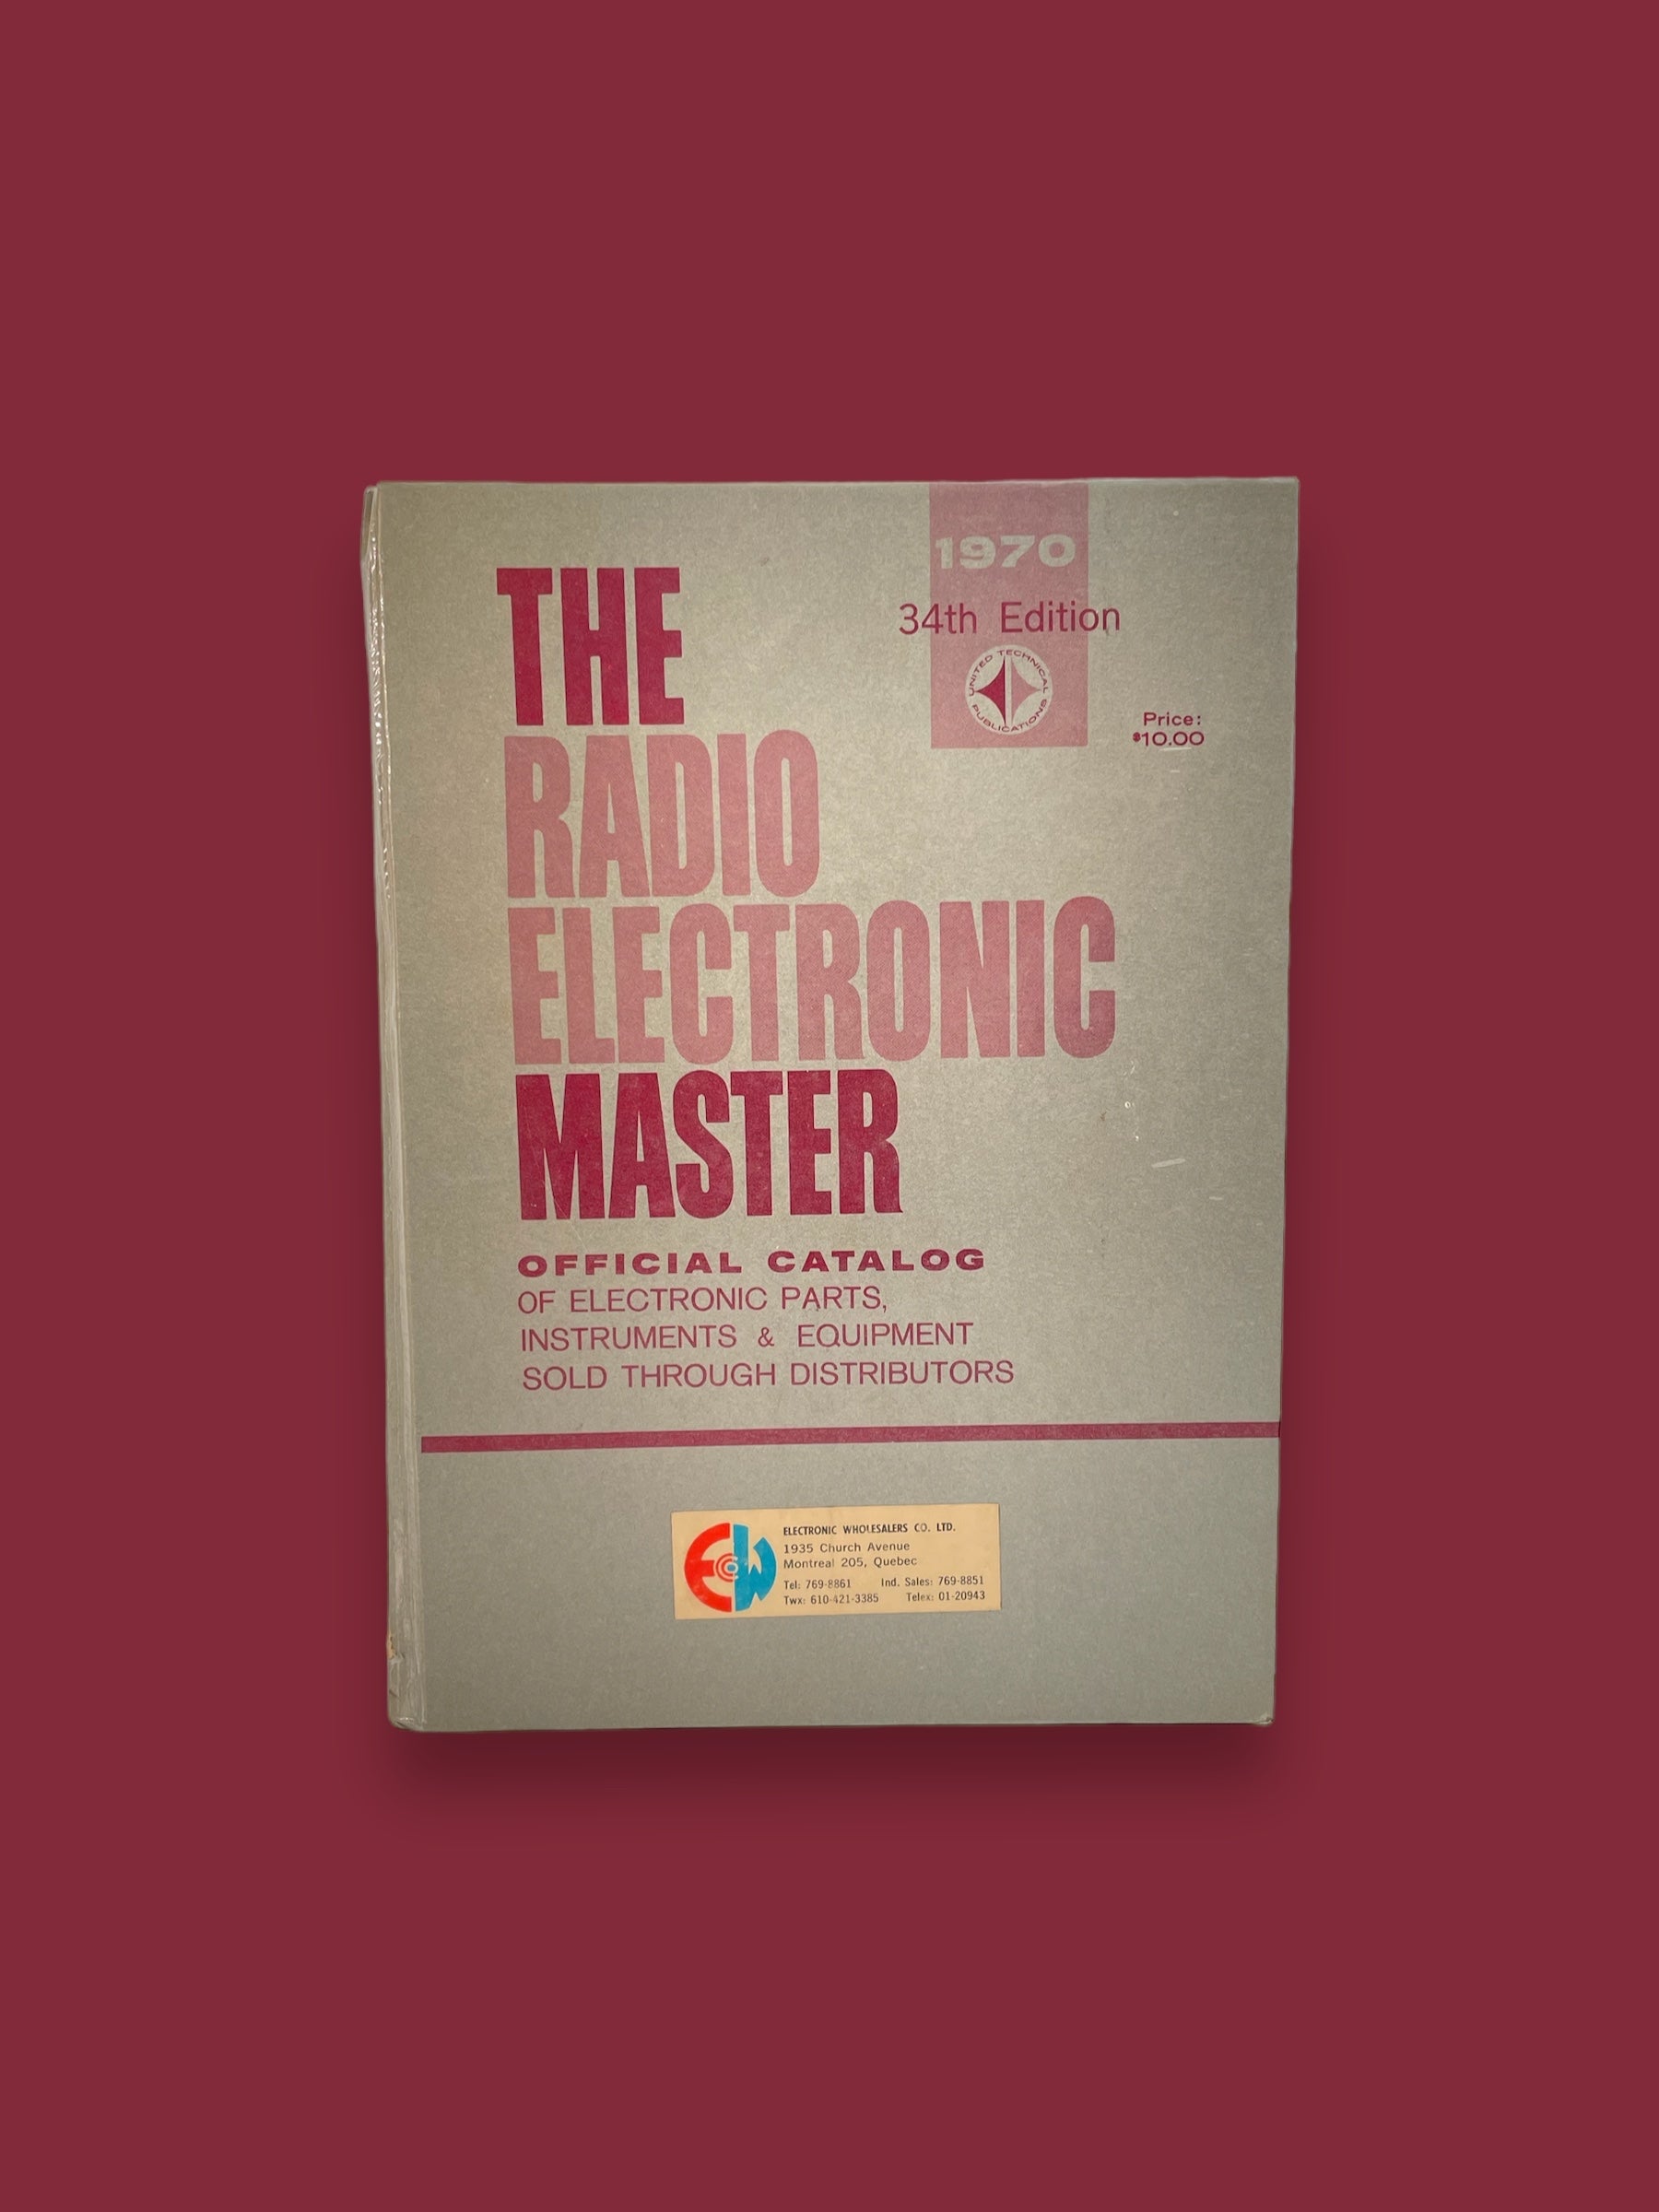 Vintage 1970 34th Edition of "The Radio Electronic Master"